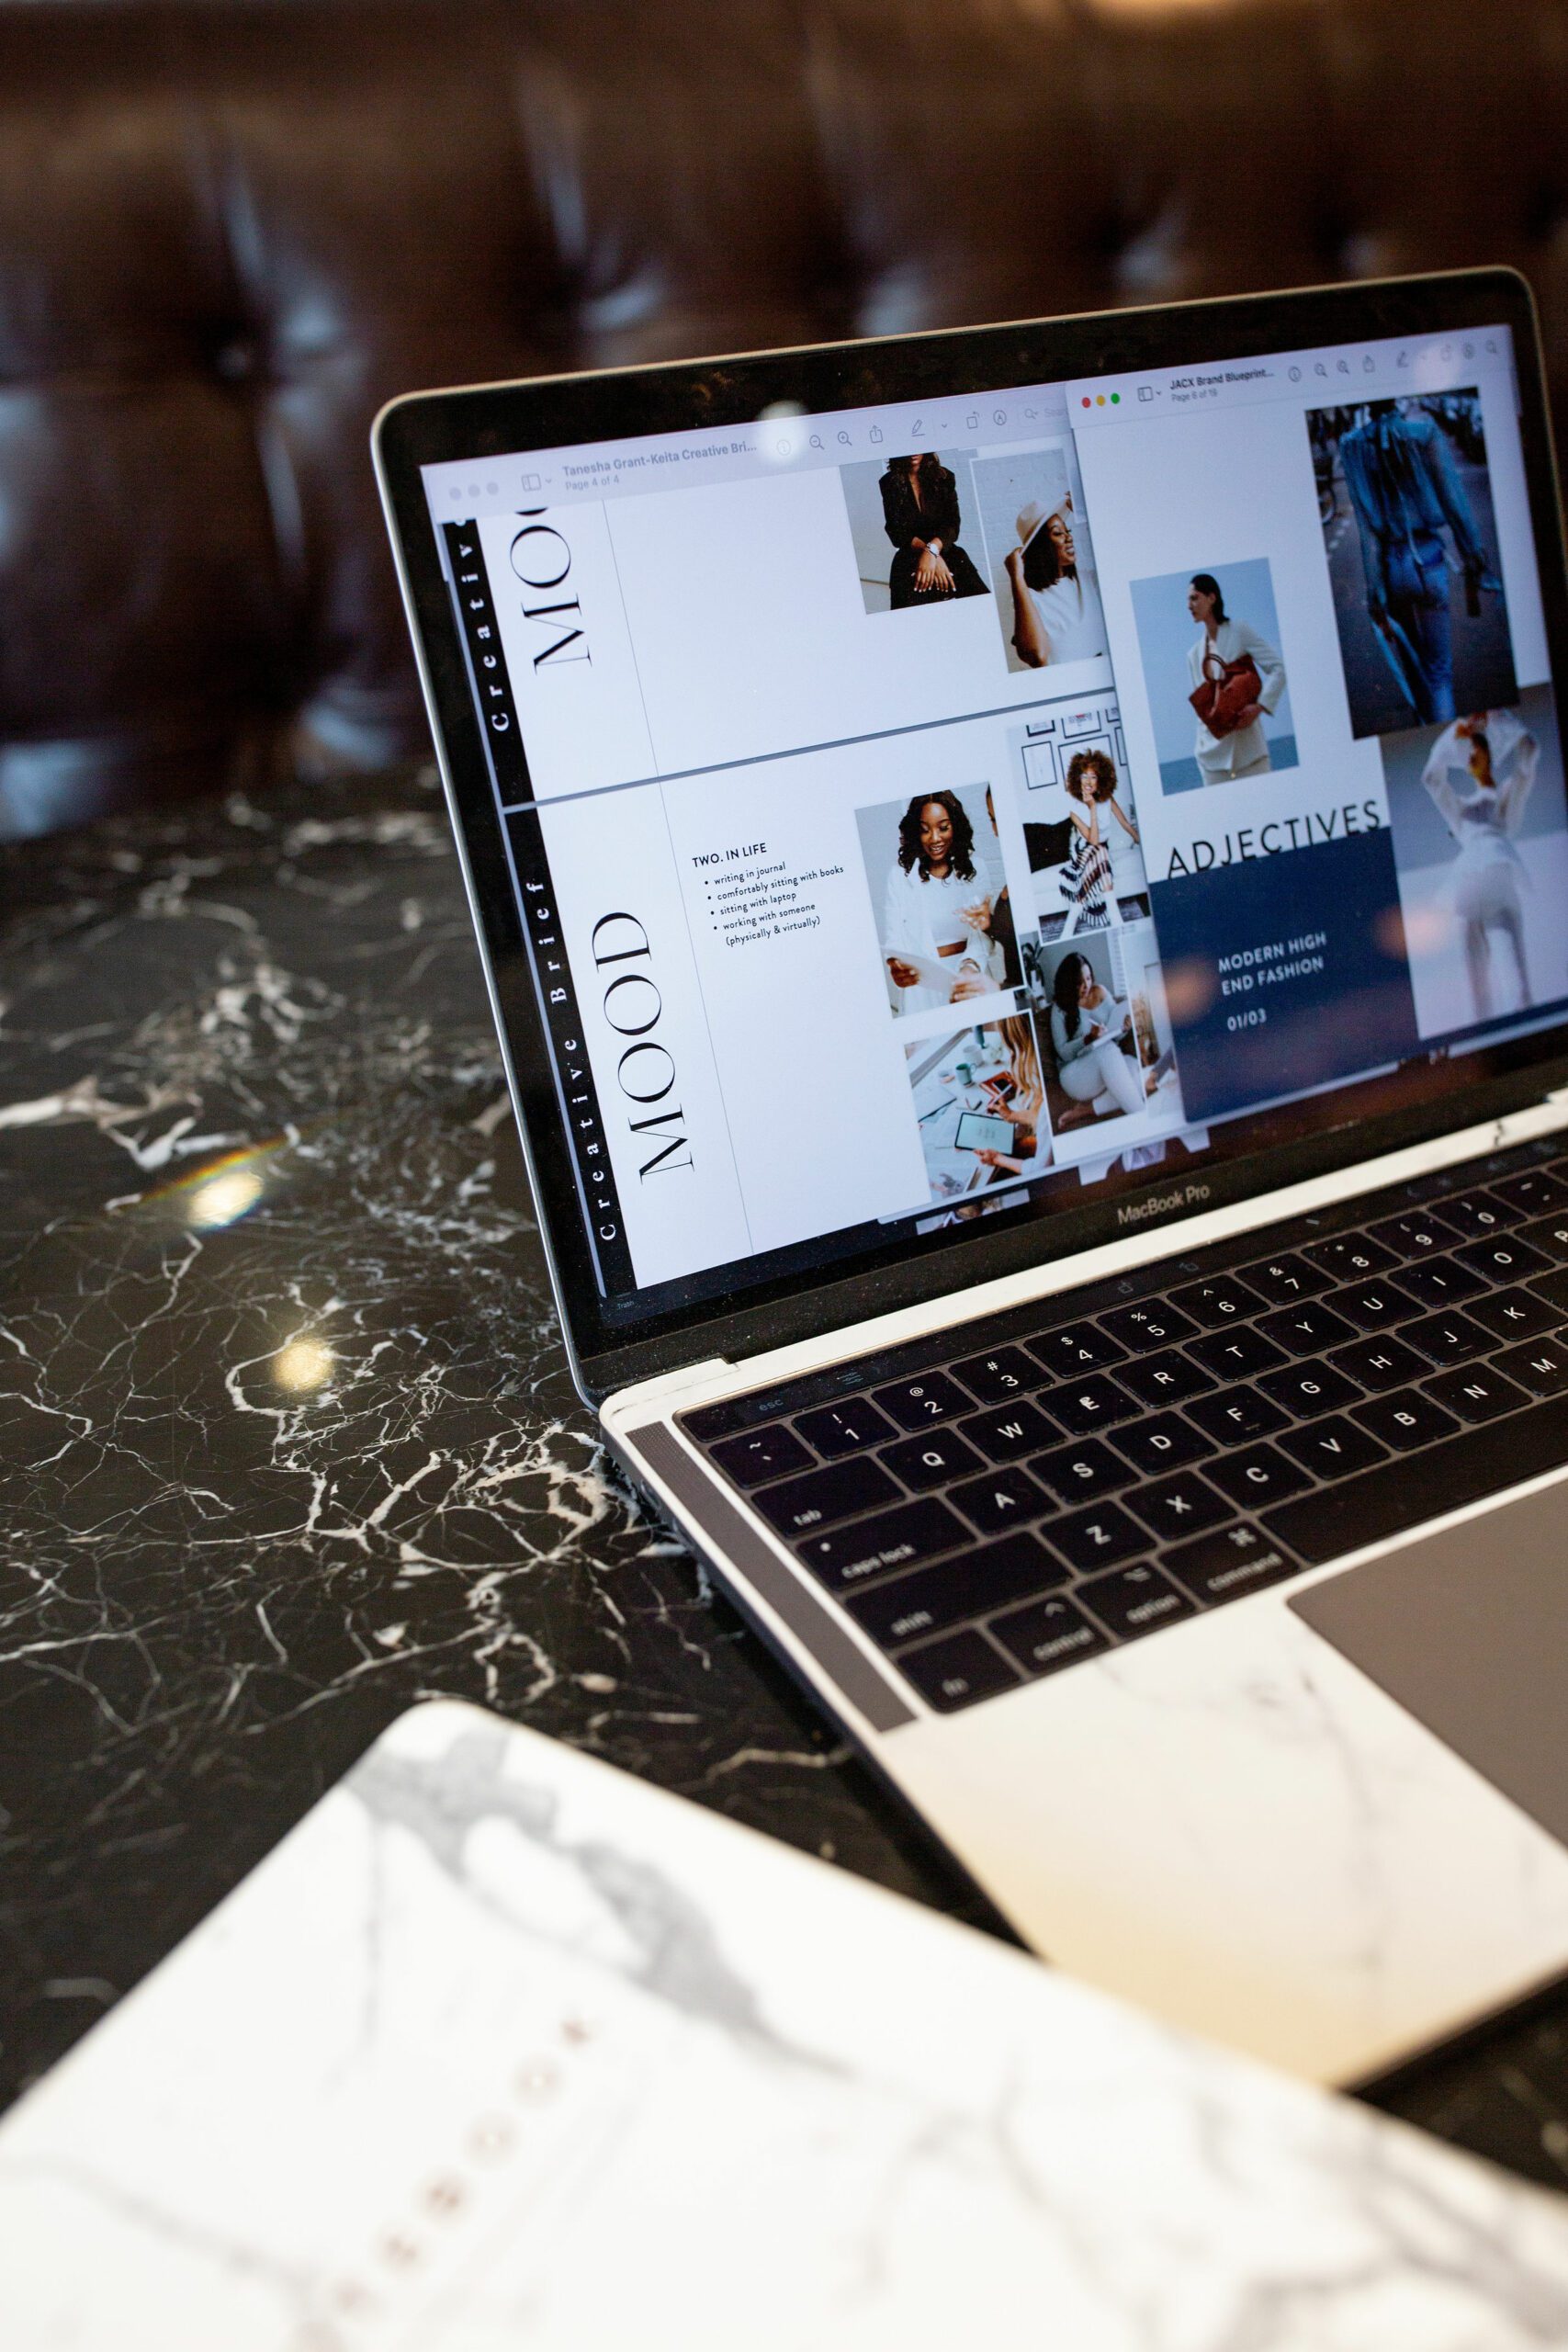 Silver macbook on marble table with the moodboard for a business displayed on the screen